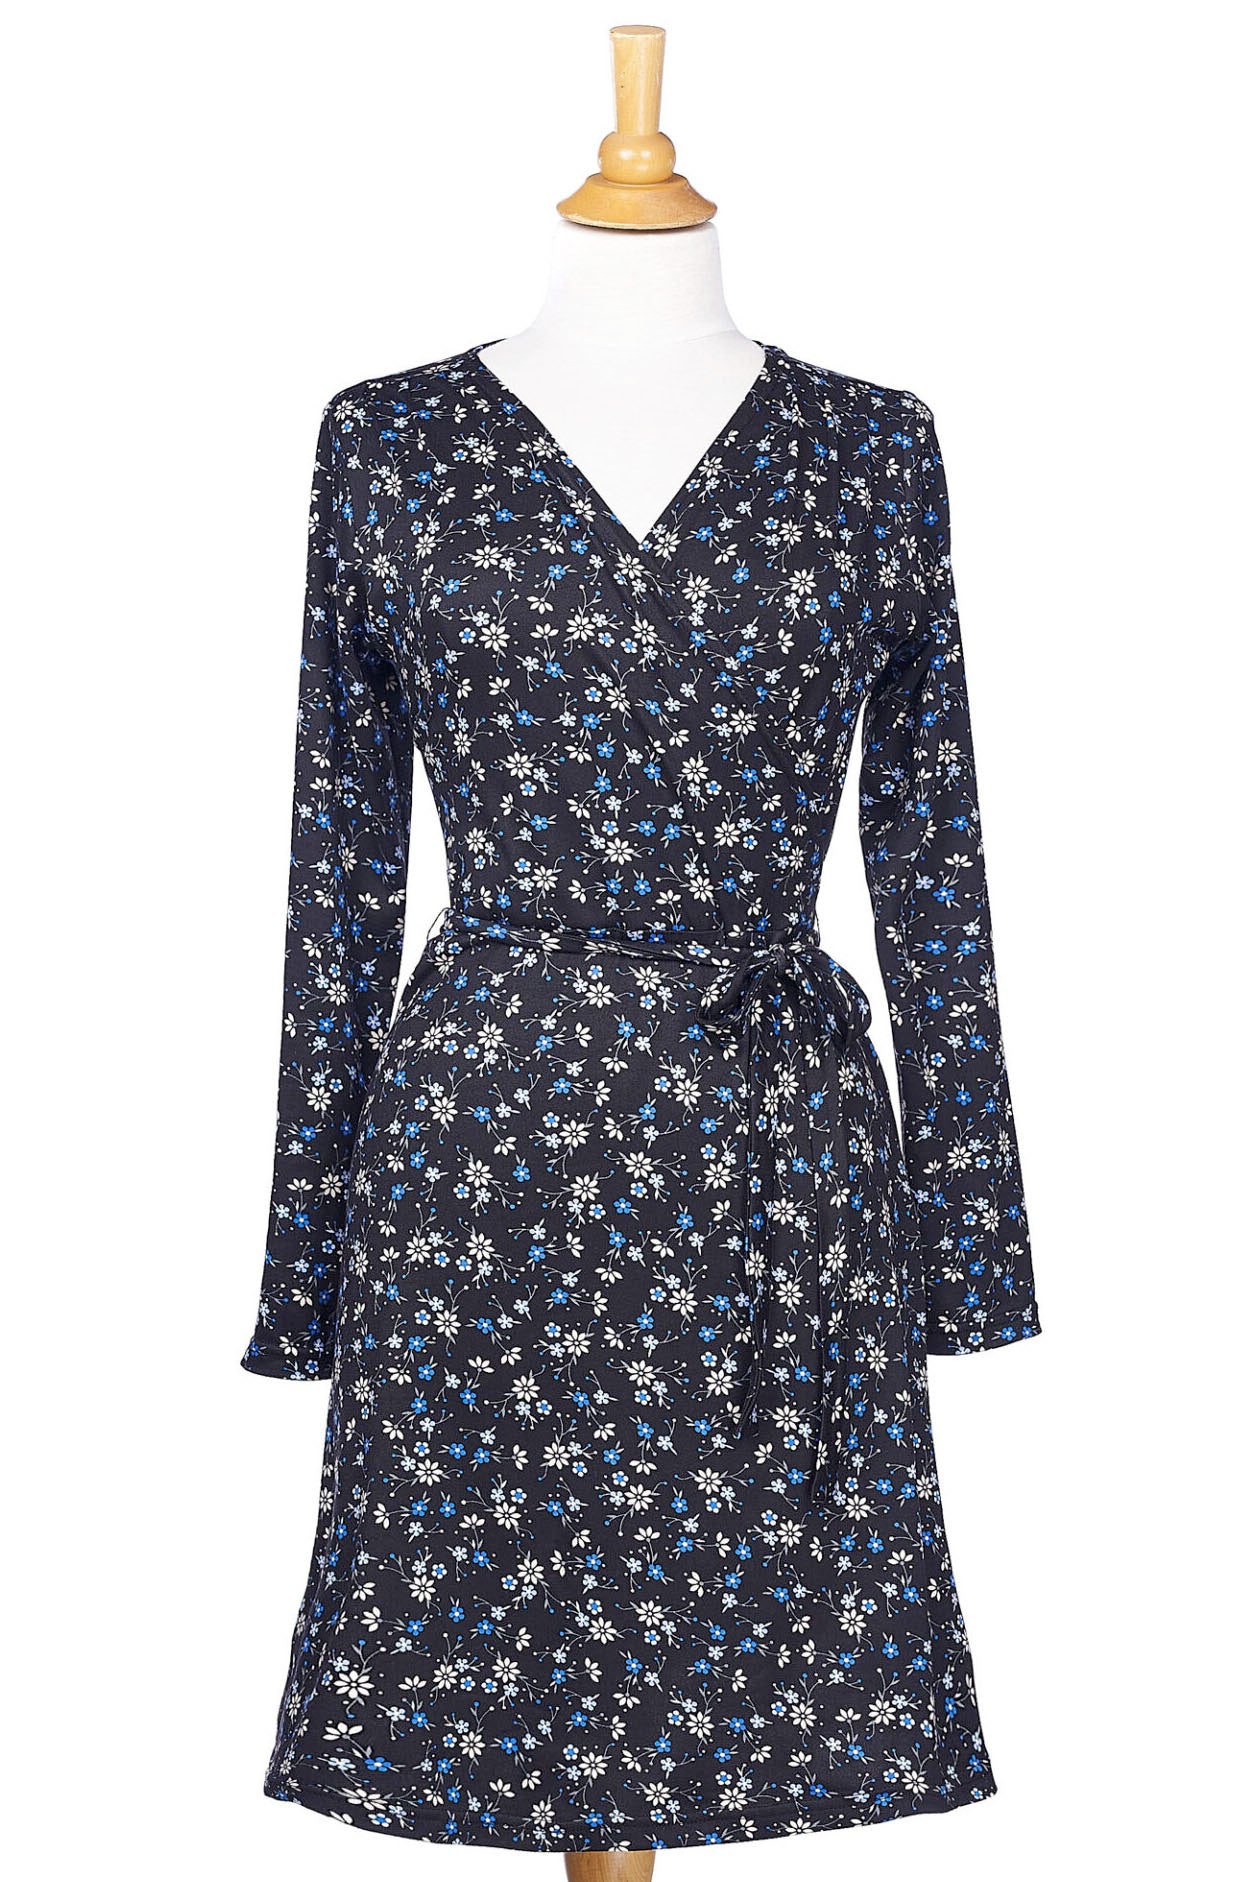 Ste-Anne Dress by Rien ne se Perd, Blue, floral, faux-wrap dress, tie belt, pleats at shoulders, fit and flare, sizes XS to XXL, made in Quebec